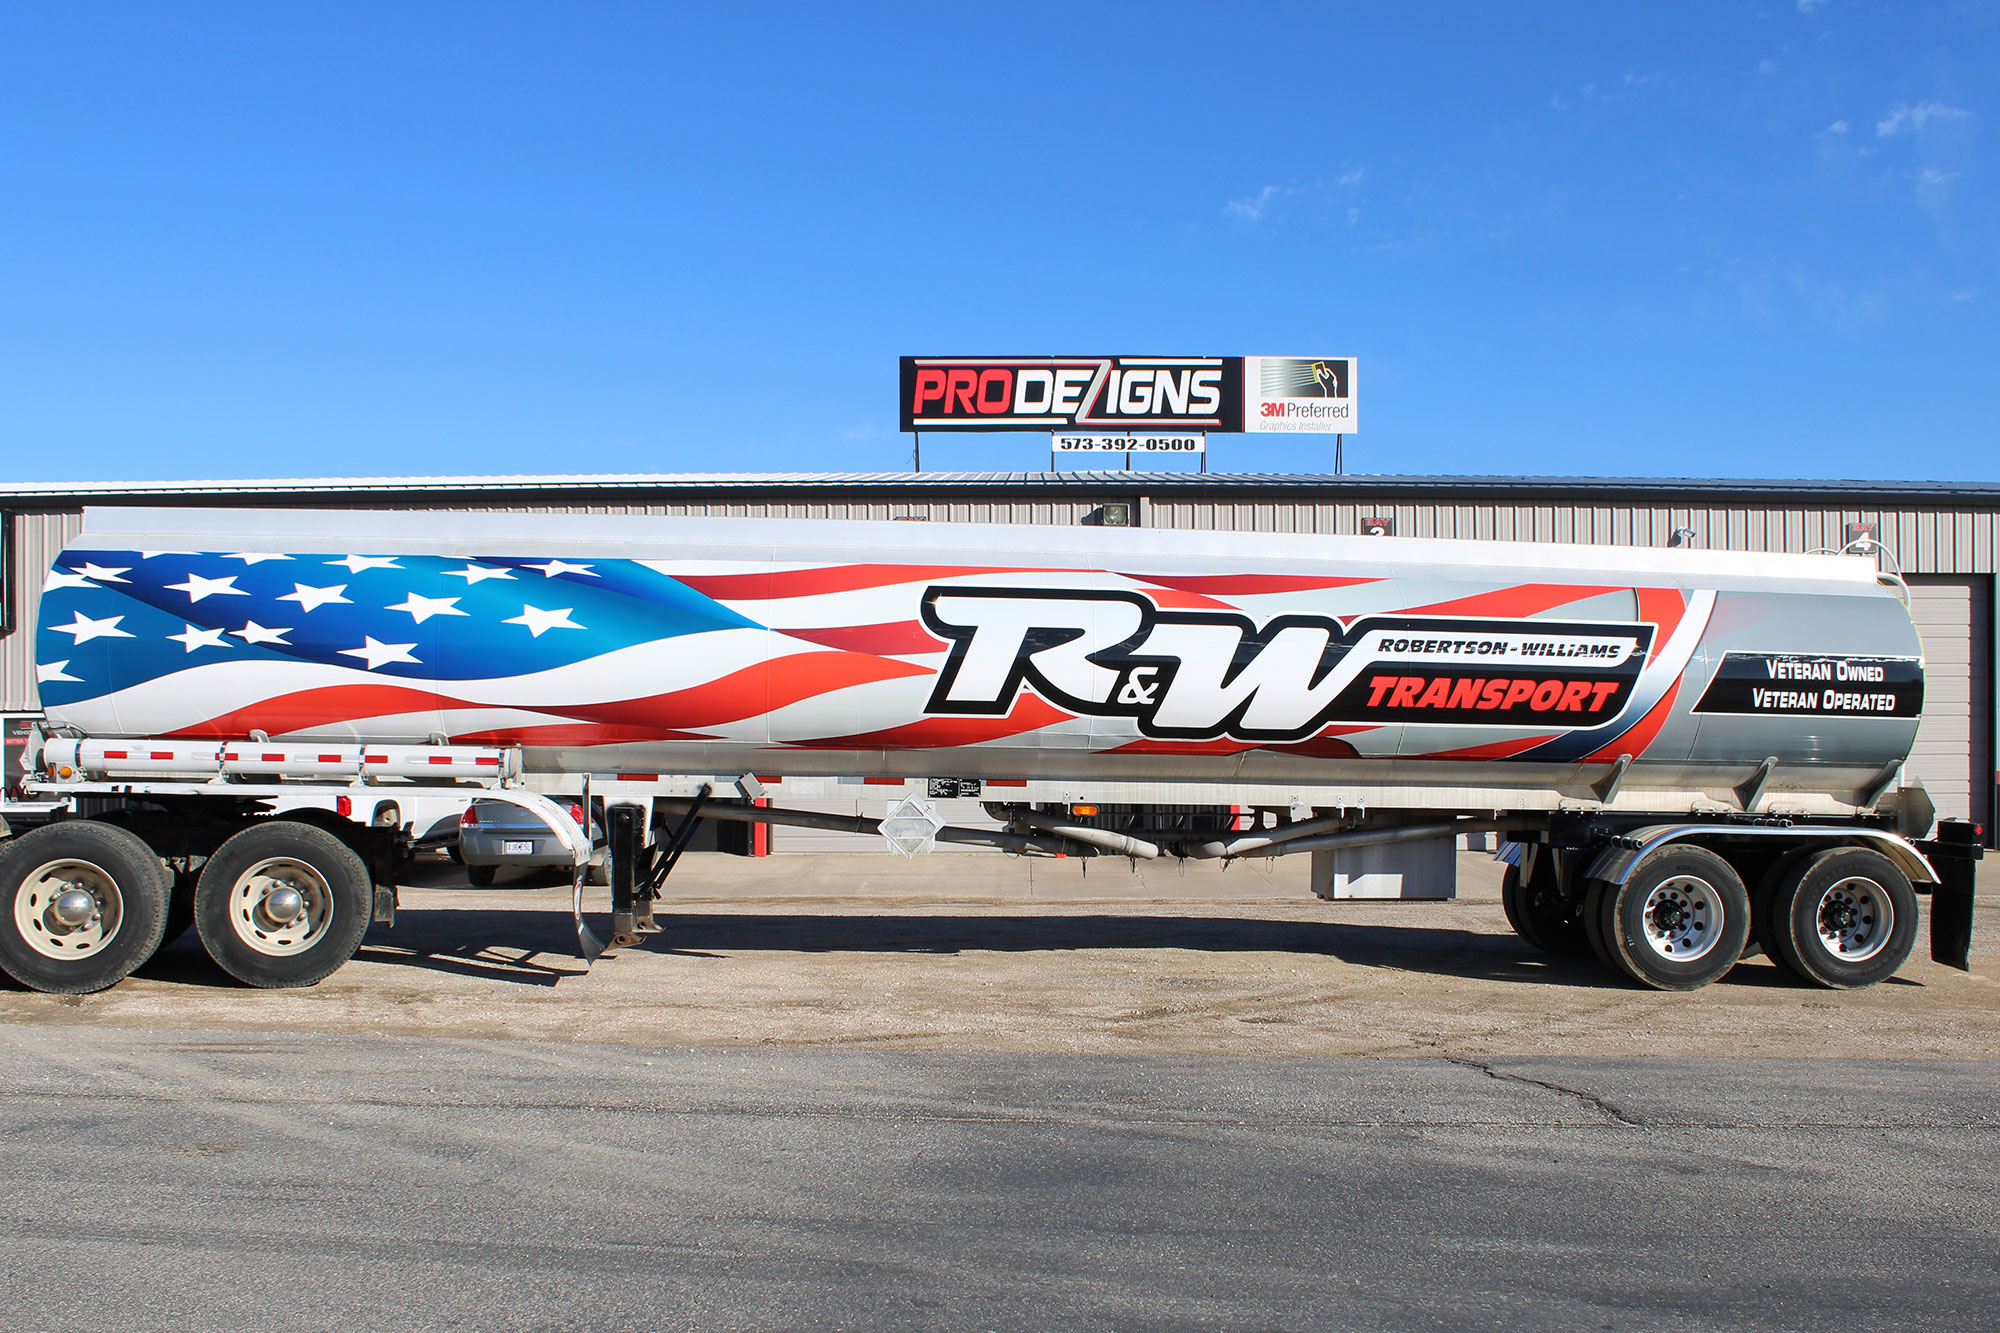 R And W Transport Tanker Vinyl Wraps Store Fronts Windows Outdoor Pro Dezigns Jeff City Mo